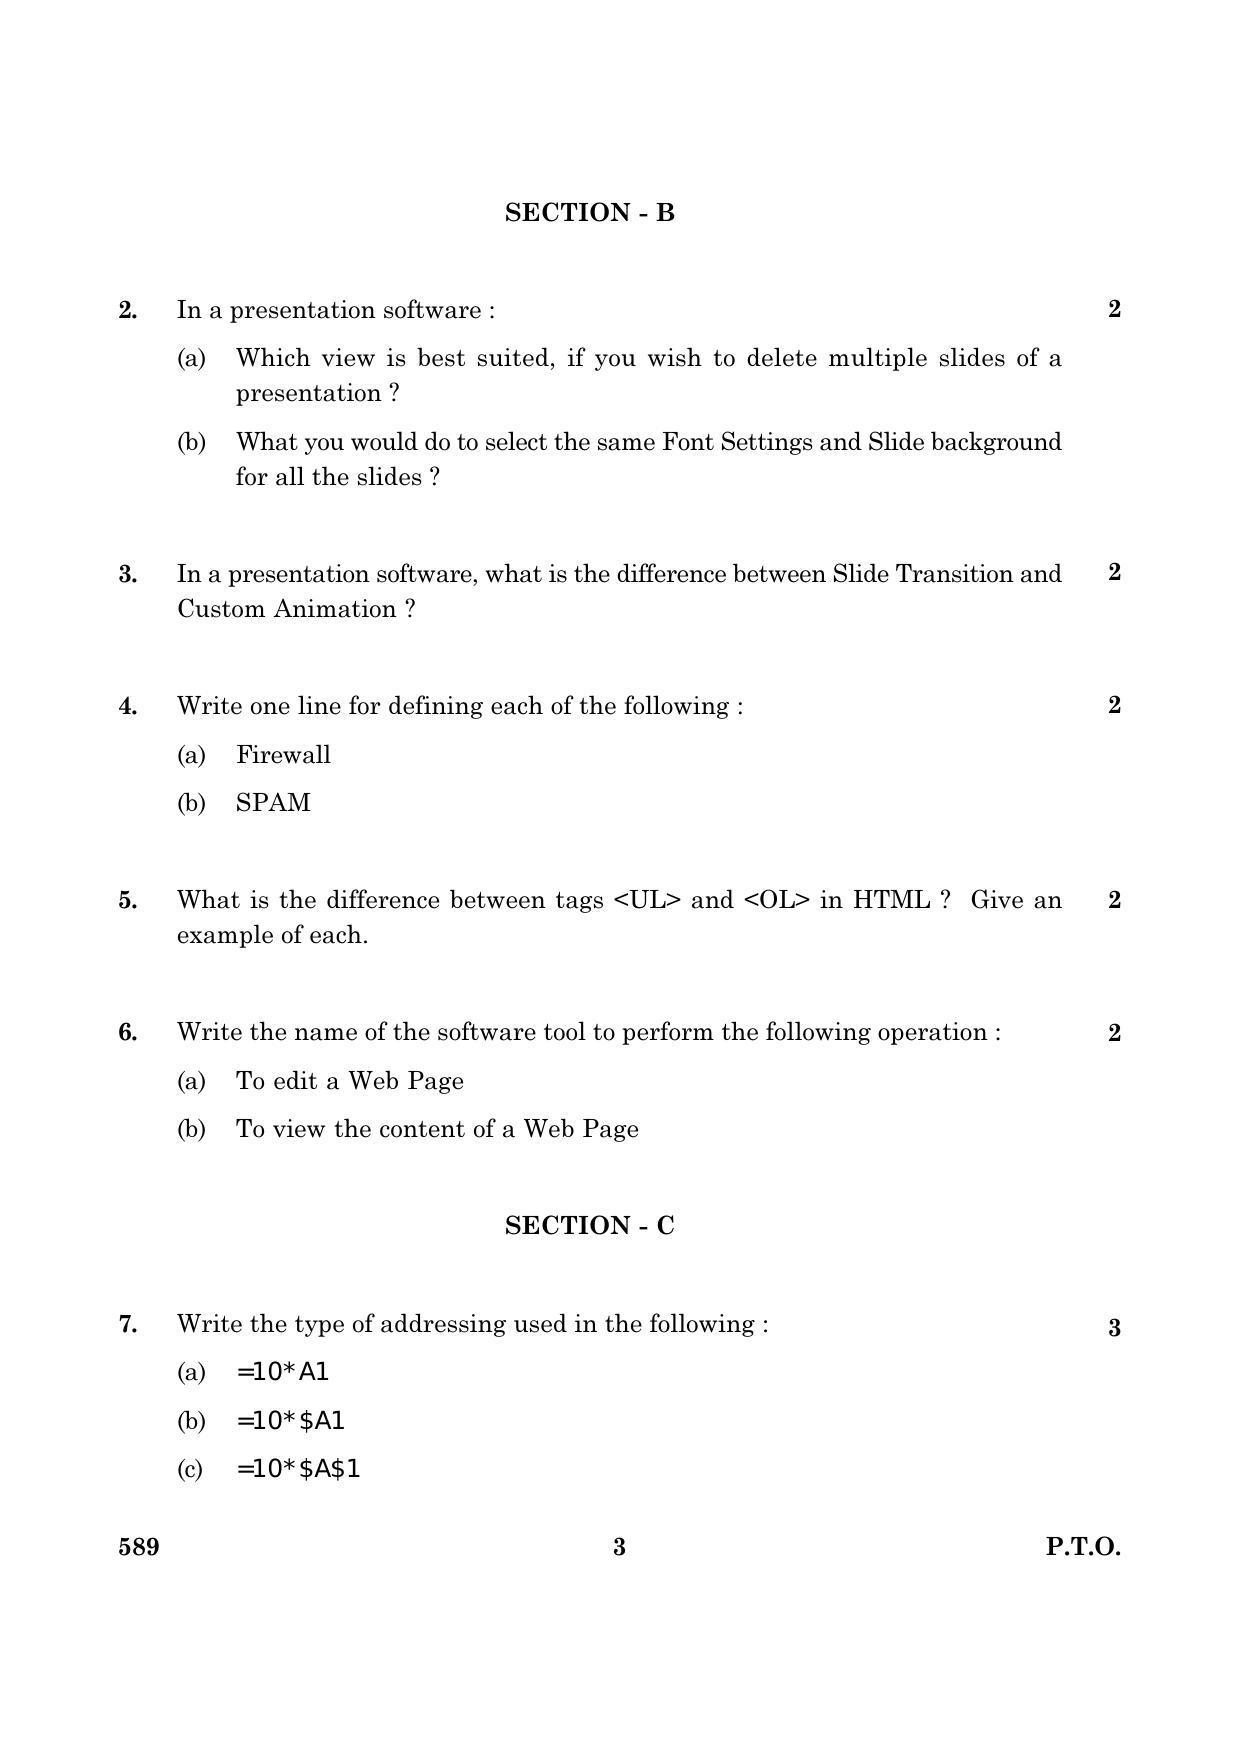 CBSE Class 10 NSQF 589 Information Technology 2016 Question Paper - Page 3